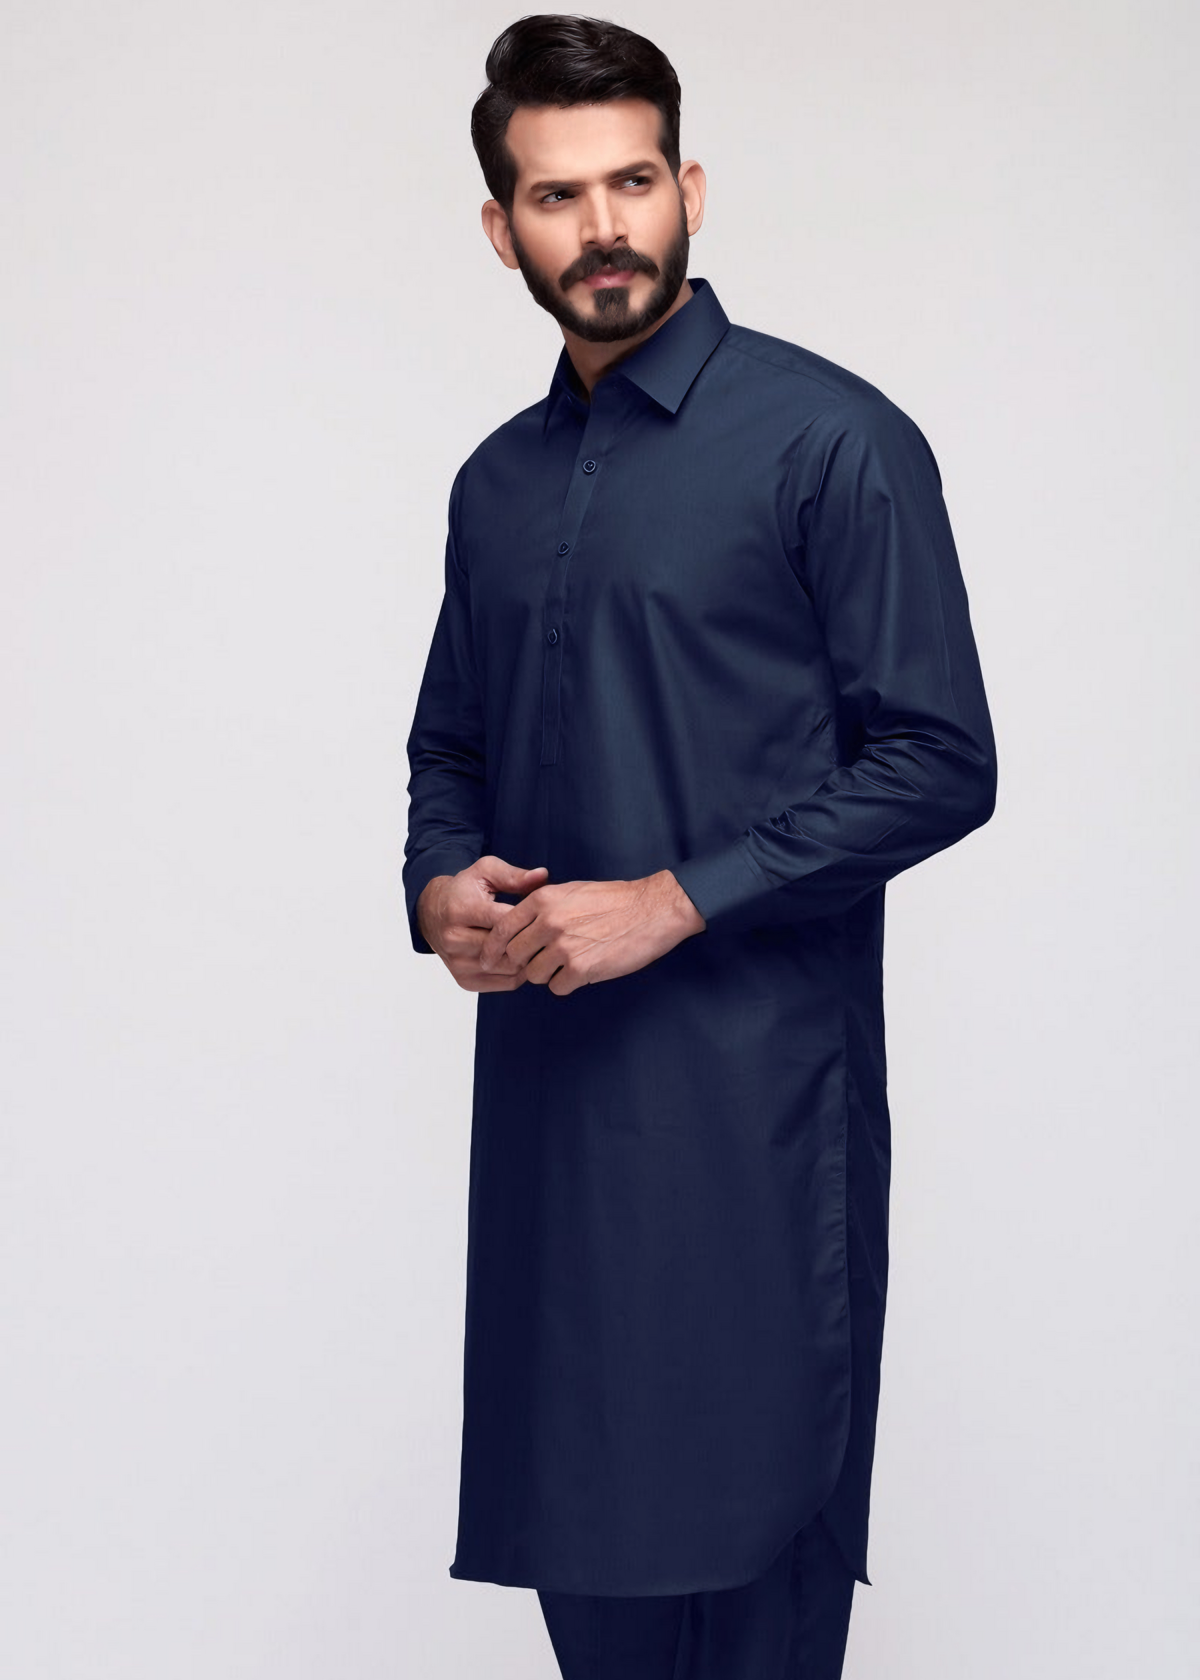 Gul Ahmed Men's Unstitched Suits Sale Navy Blue Unstitched Fabric GUL 90000 F-ULTRA SOFT-NS - Askani Group